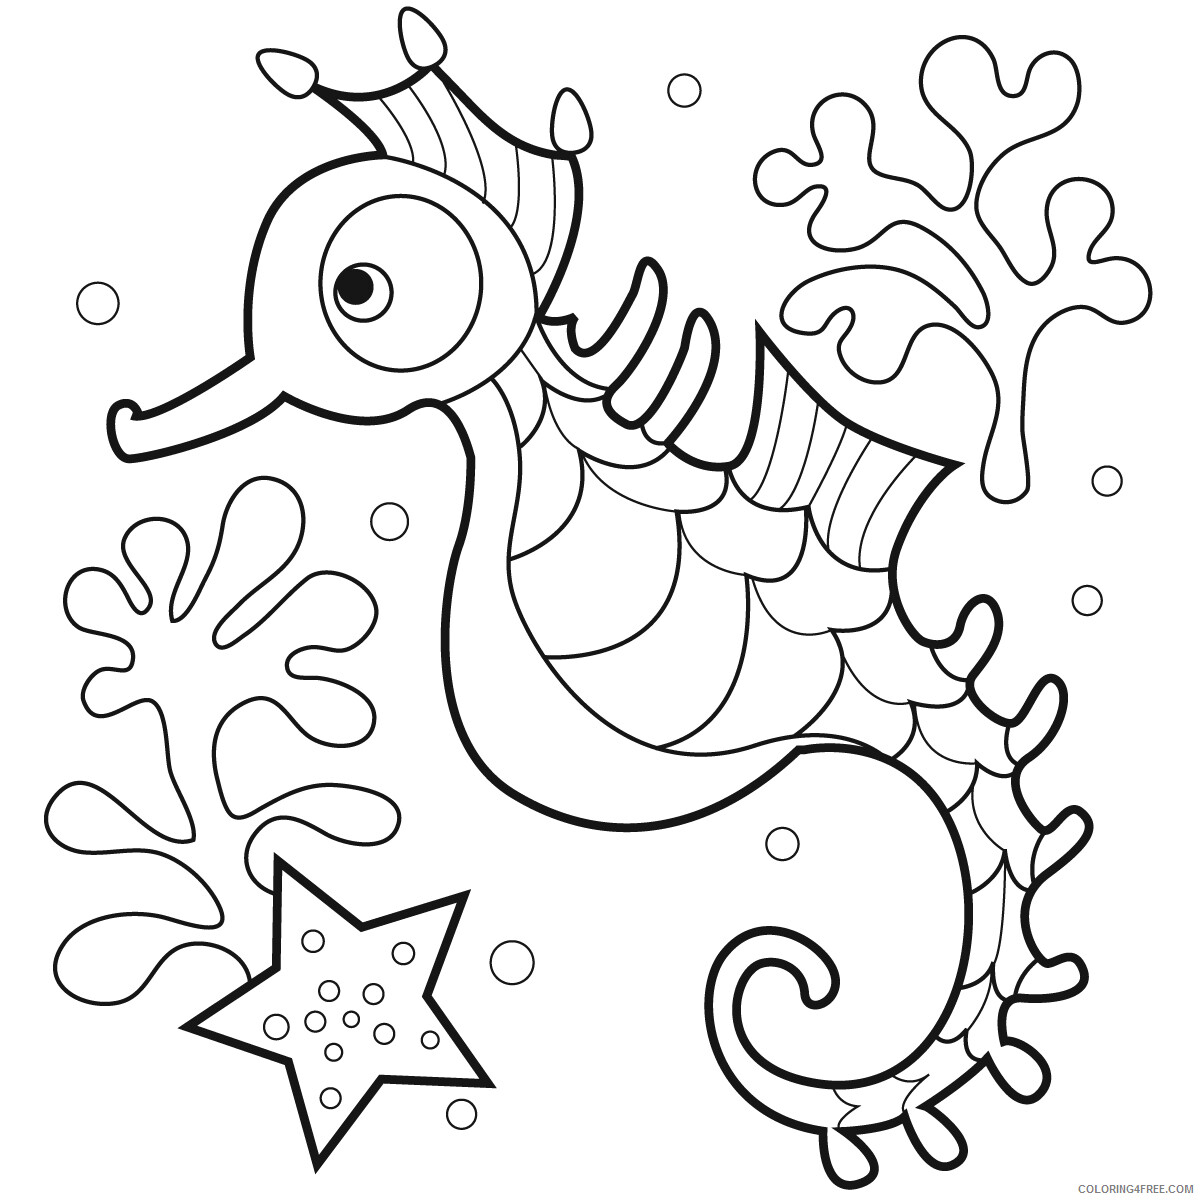 Seahorse Coloring Pages Animal Printable Sheets Seahorse Sheets Free 2021 4404 Coloring4free